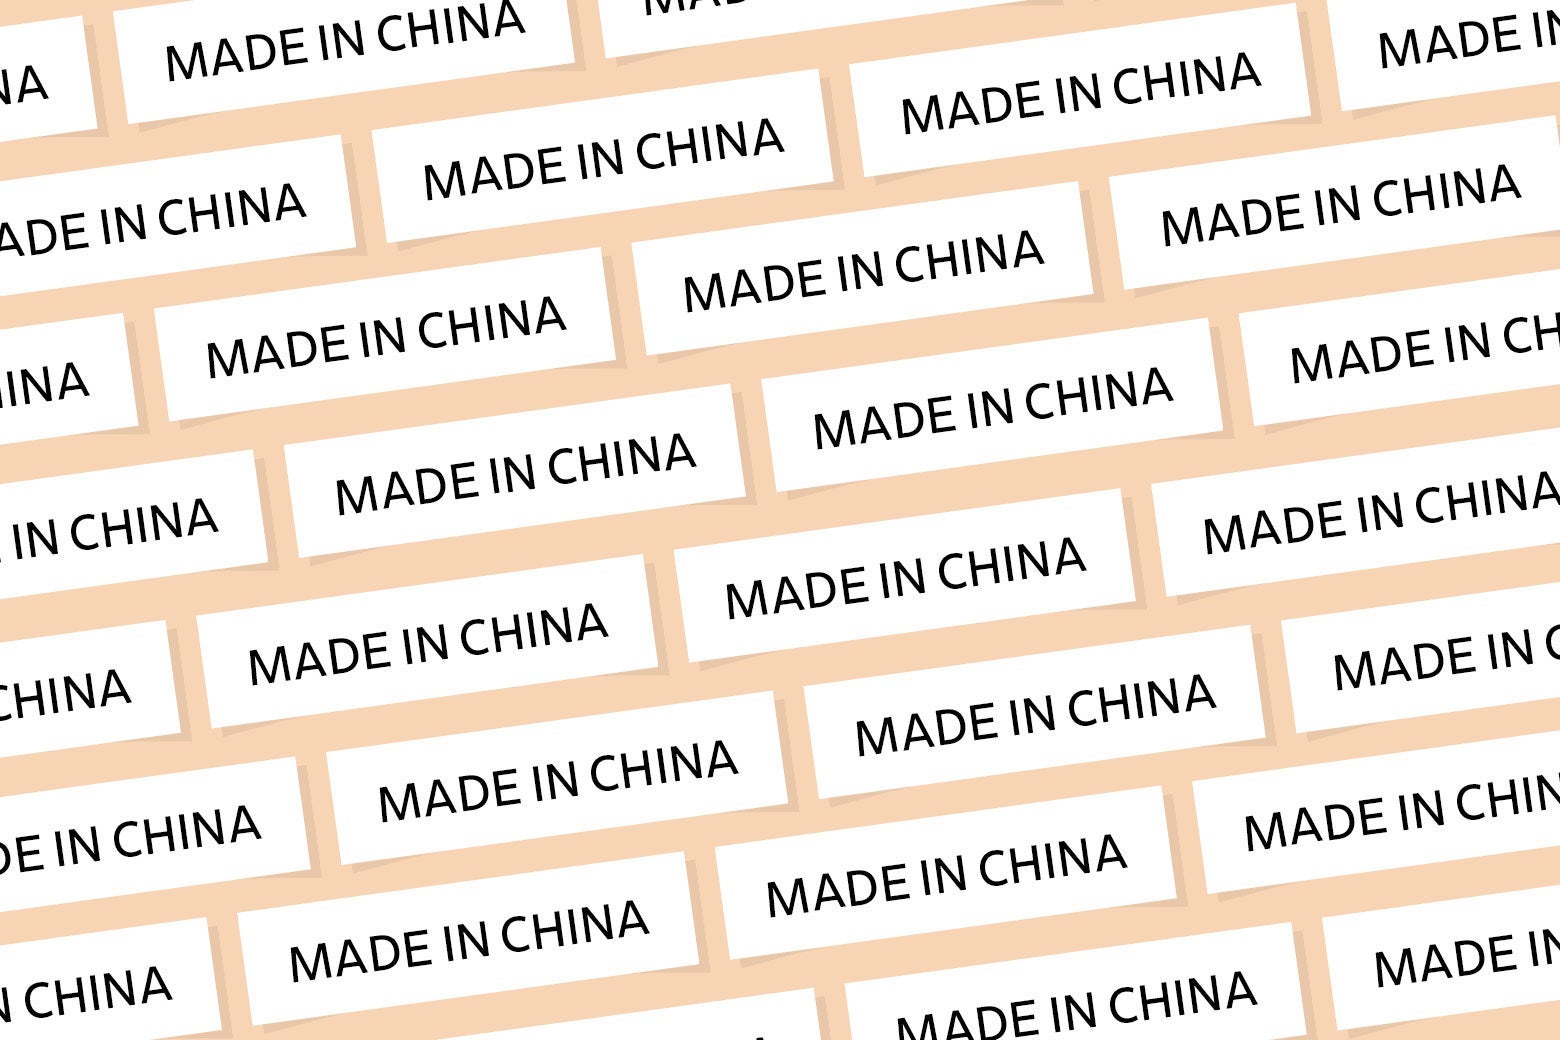 A bunch of Made in China labels repeating over and over.